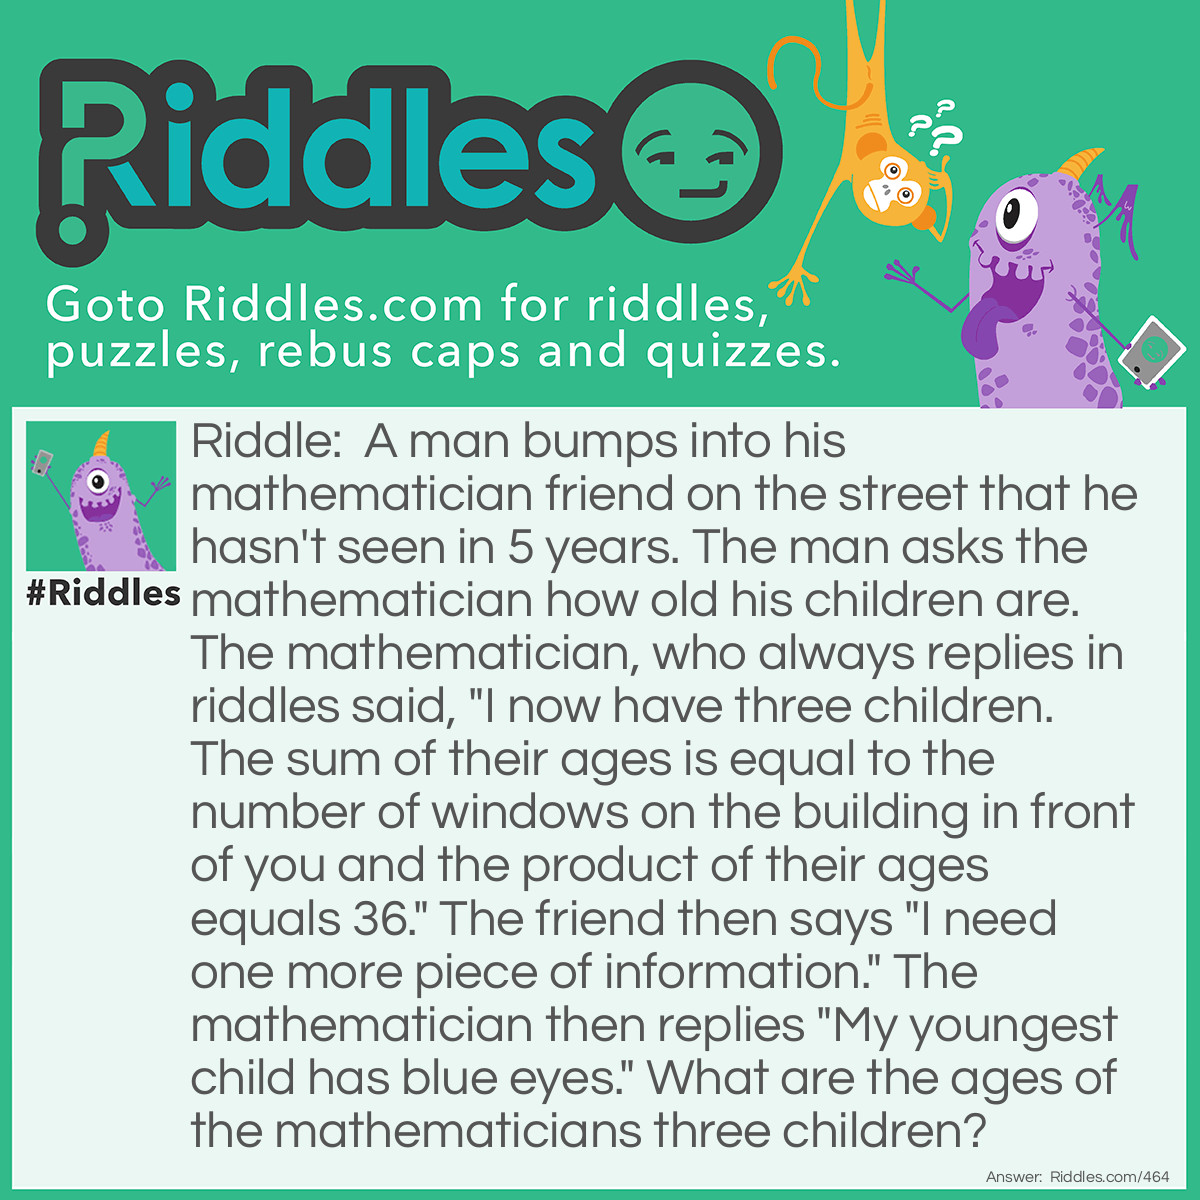 Riddle: A man bumps into his mathematician friend on the street whom he hasn't seen in 5 years. The man asks the mathematician how old his children are. The mathematician, who always replies in <a href="https://www.riddles.com">riddles</a> said, "I now have three children. The sum of their ages is equal to the number of windows on the building in front of you and the product of their ages equals 36." The friend then says "I need one more piece of information." The mathematician then replies "My youngest child has blue eyes." What are the ages of the mathematician's three children? Answer: They are 6, 6, and 1.